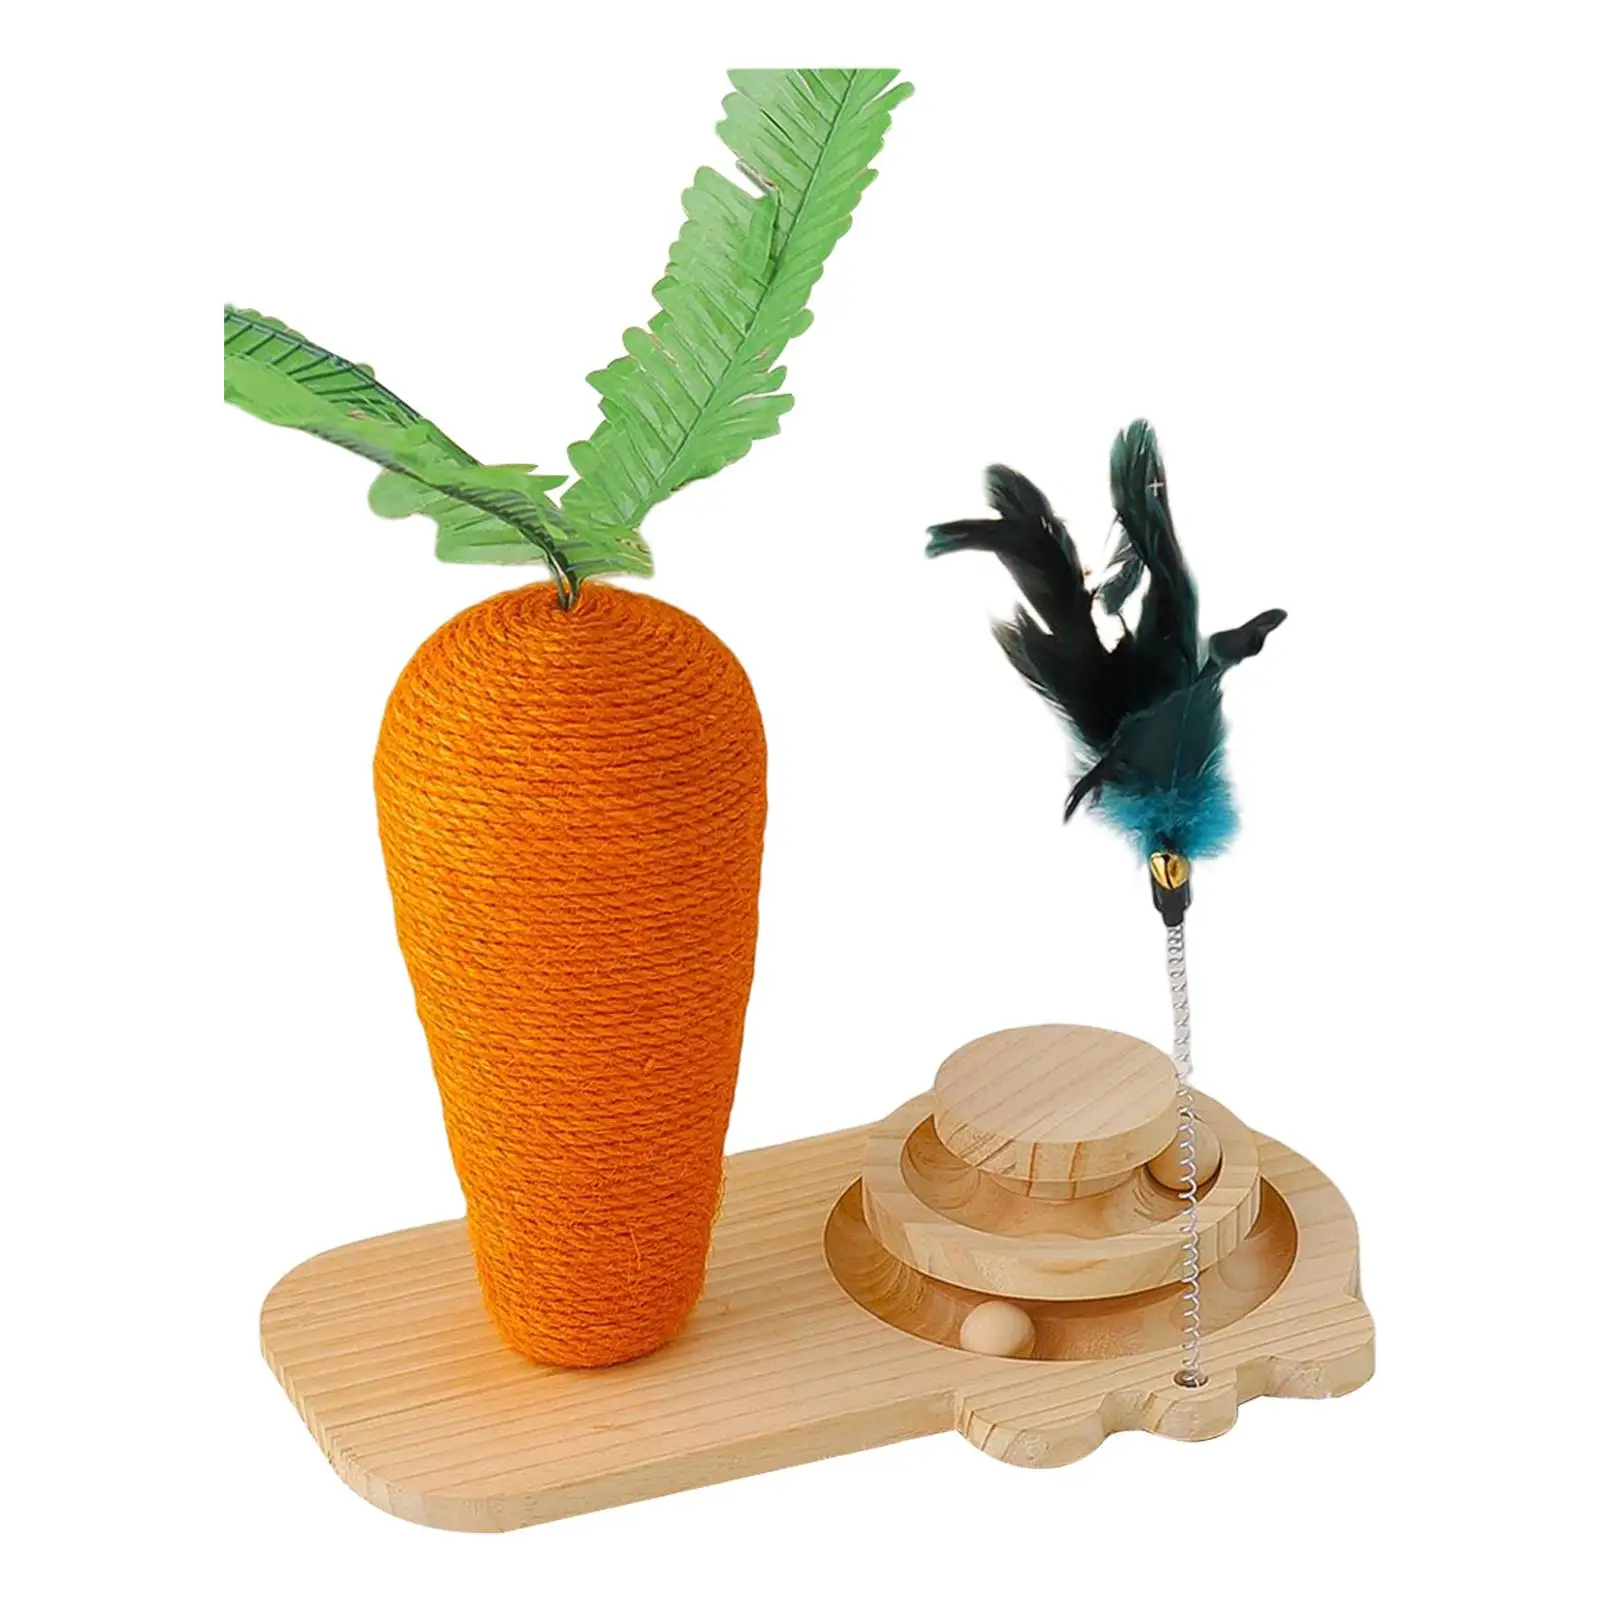 Cat Scratching Post Carrot Decorative Platform 2 Layer Ball Track Turntable Interactive Toy for Grinding Claw Kitty Kitten